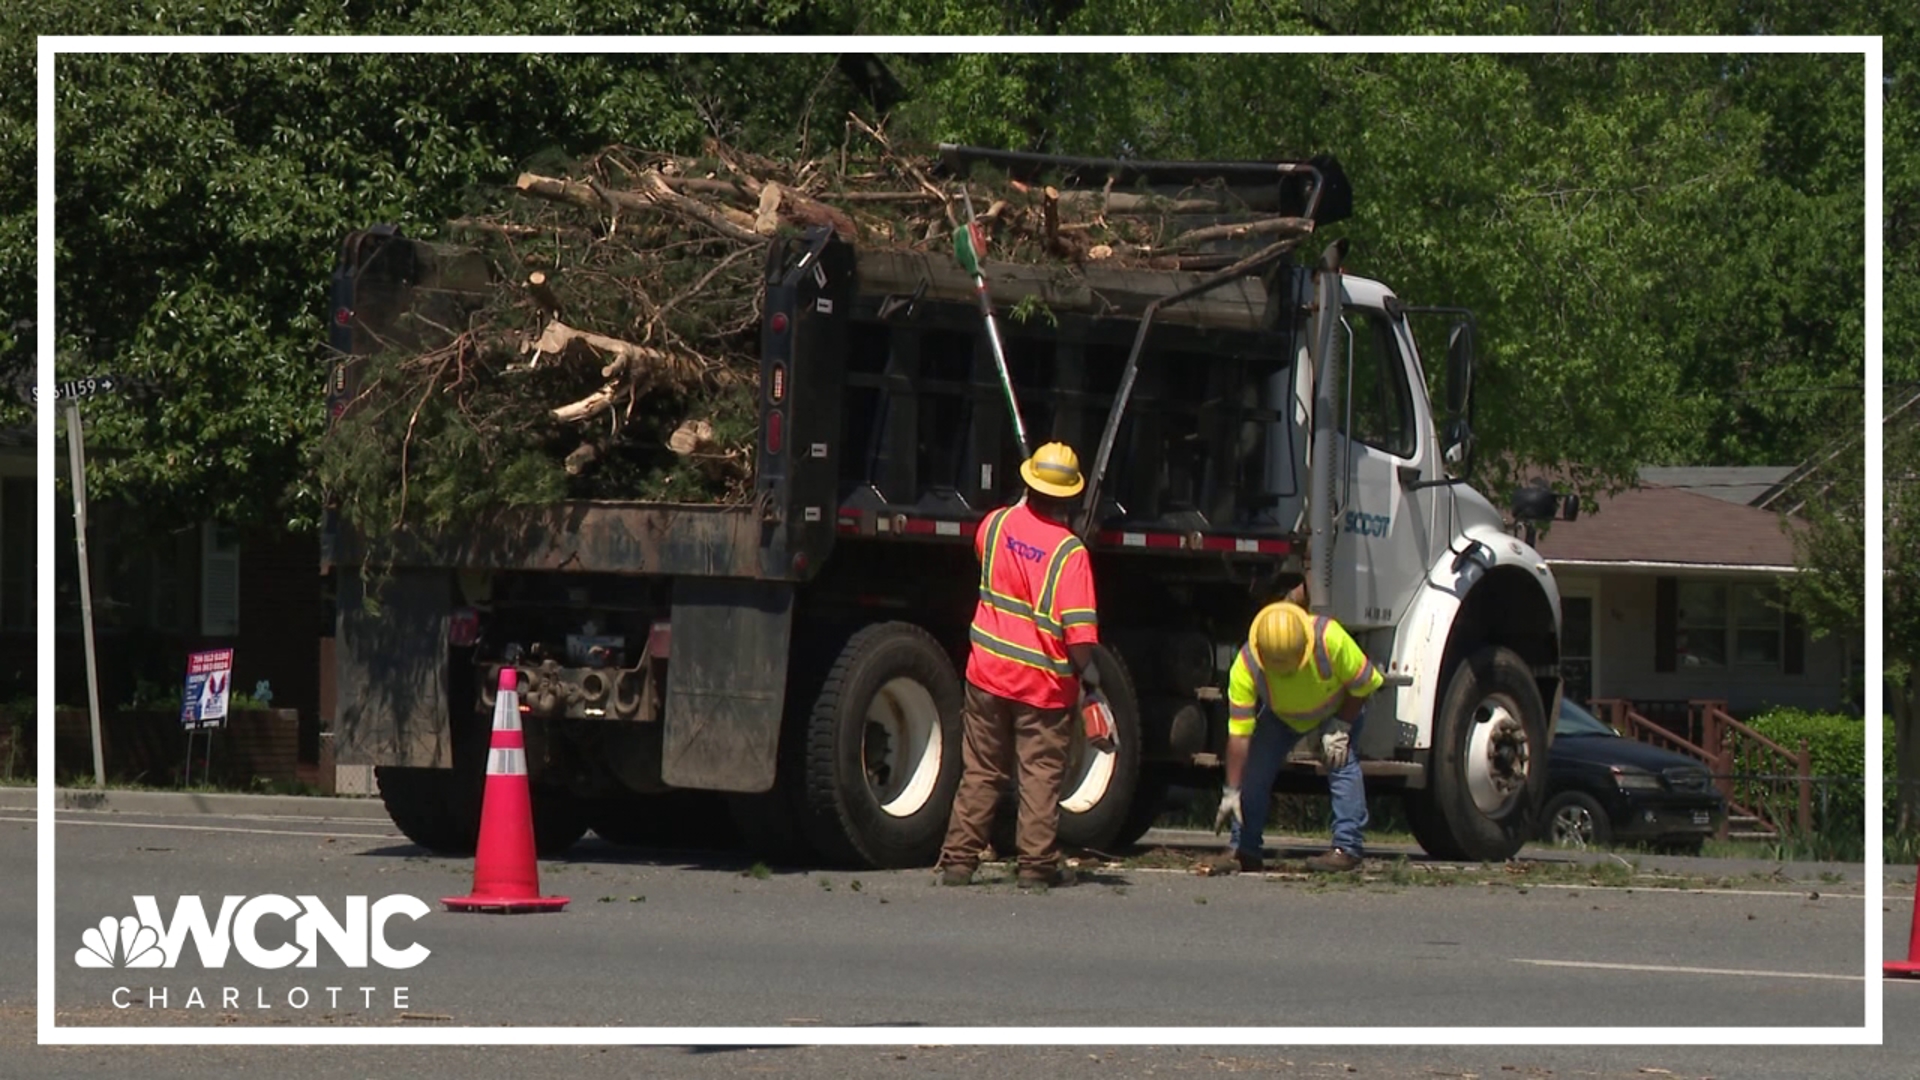 York County leaders are hoping to help people still cleaning up from last weekend's storms. People can now dump debris at the county landfill for free.